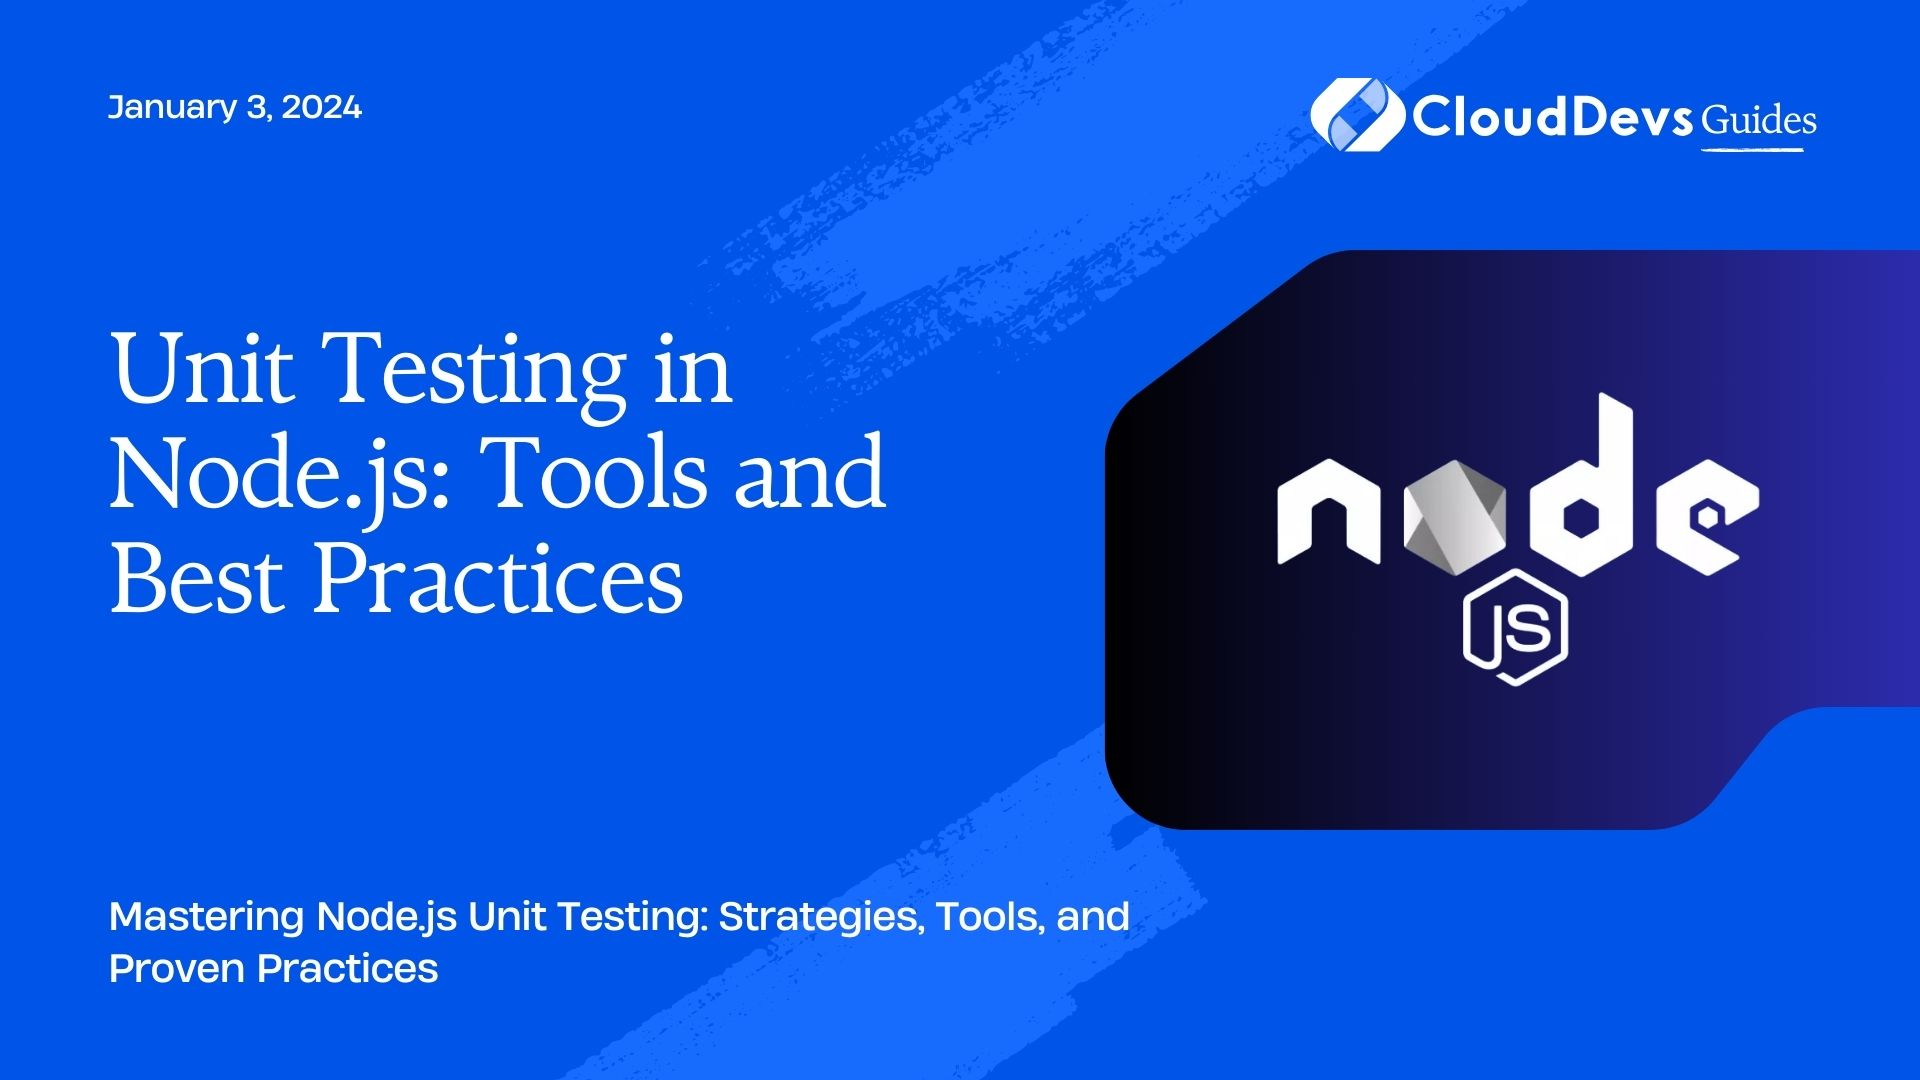 Unit Testing in Node.js: Tools and Best Practices